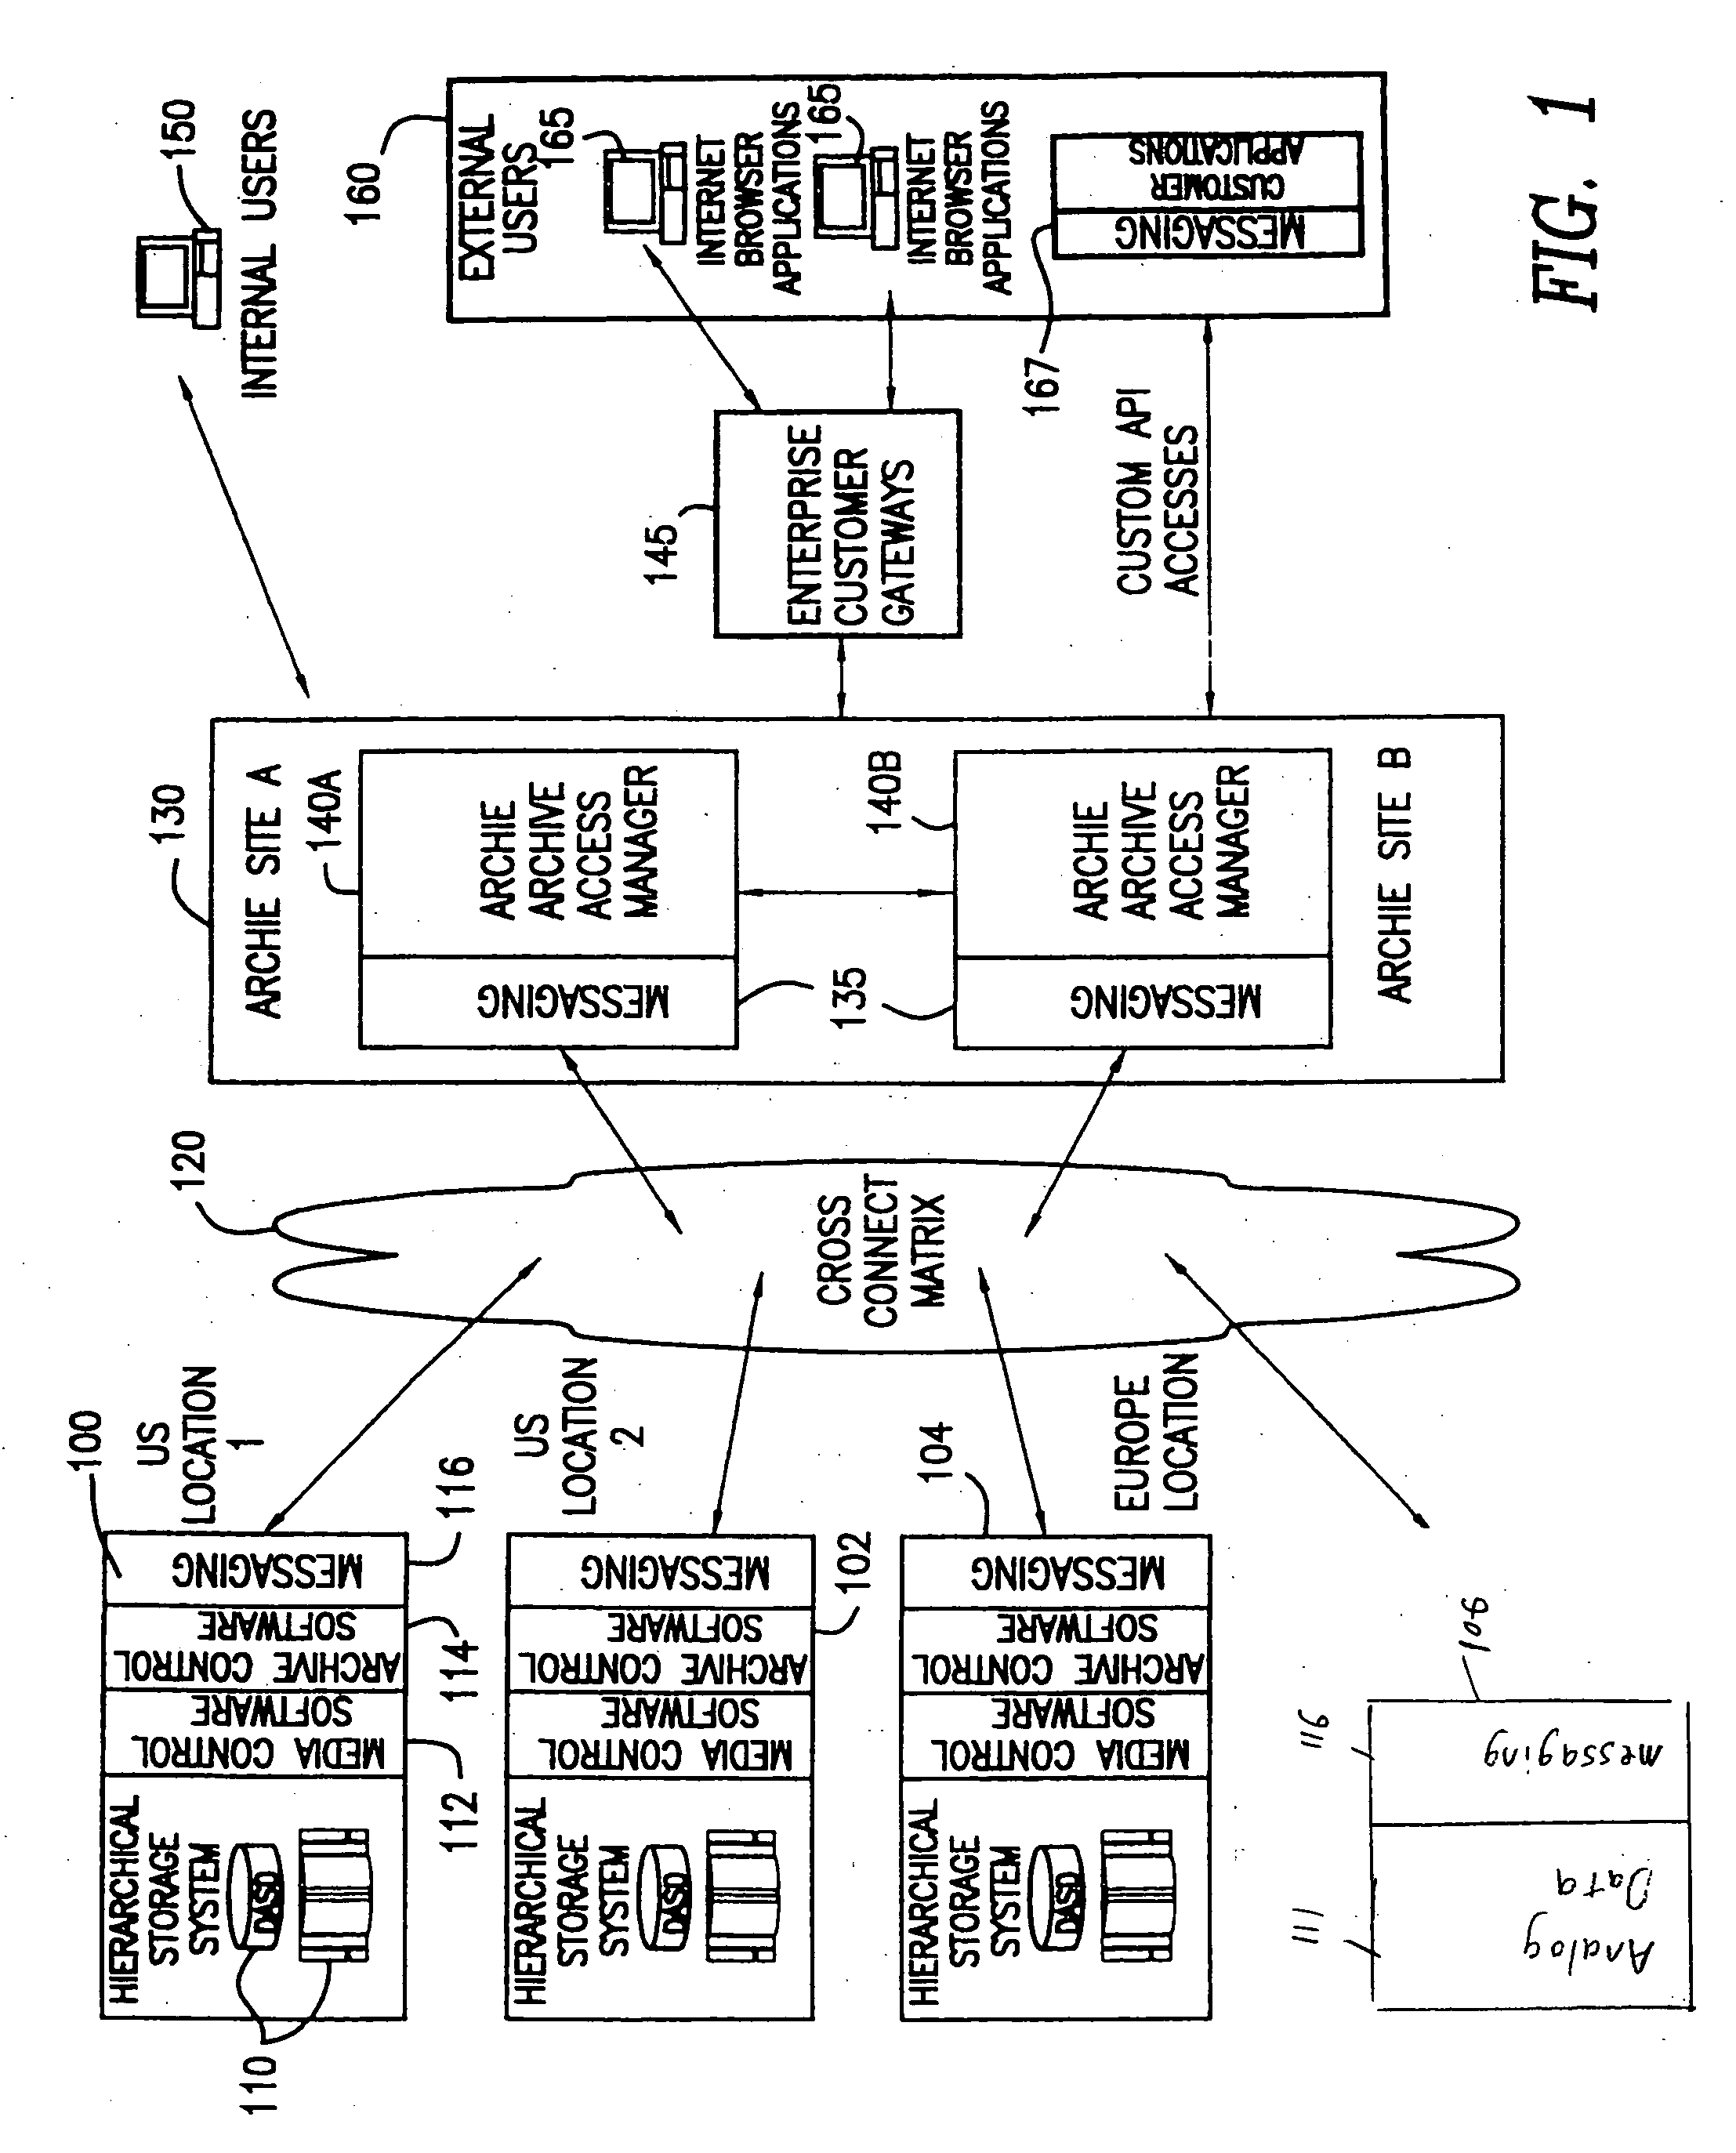 System and method for managing information retrievals for integrated digital and analog archives on a global basis